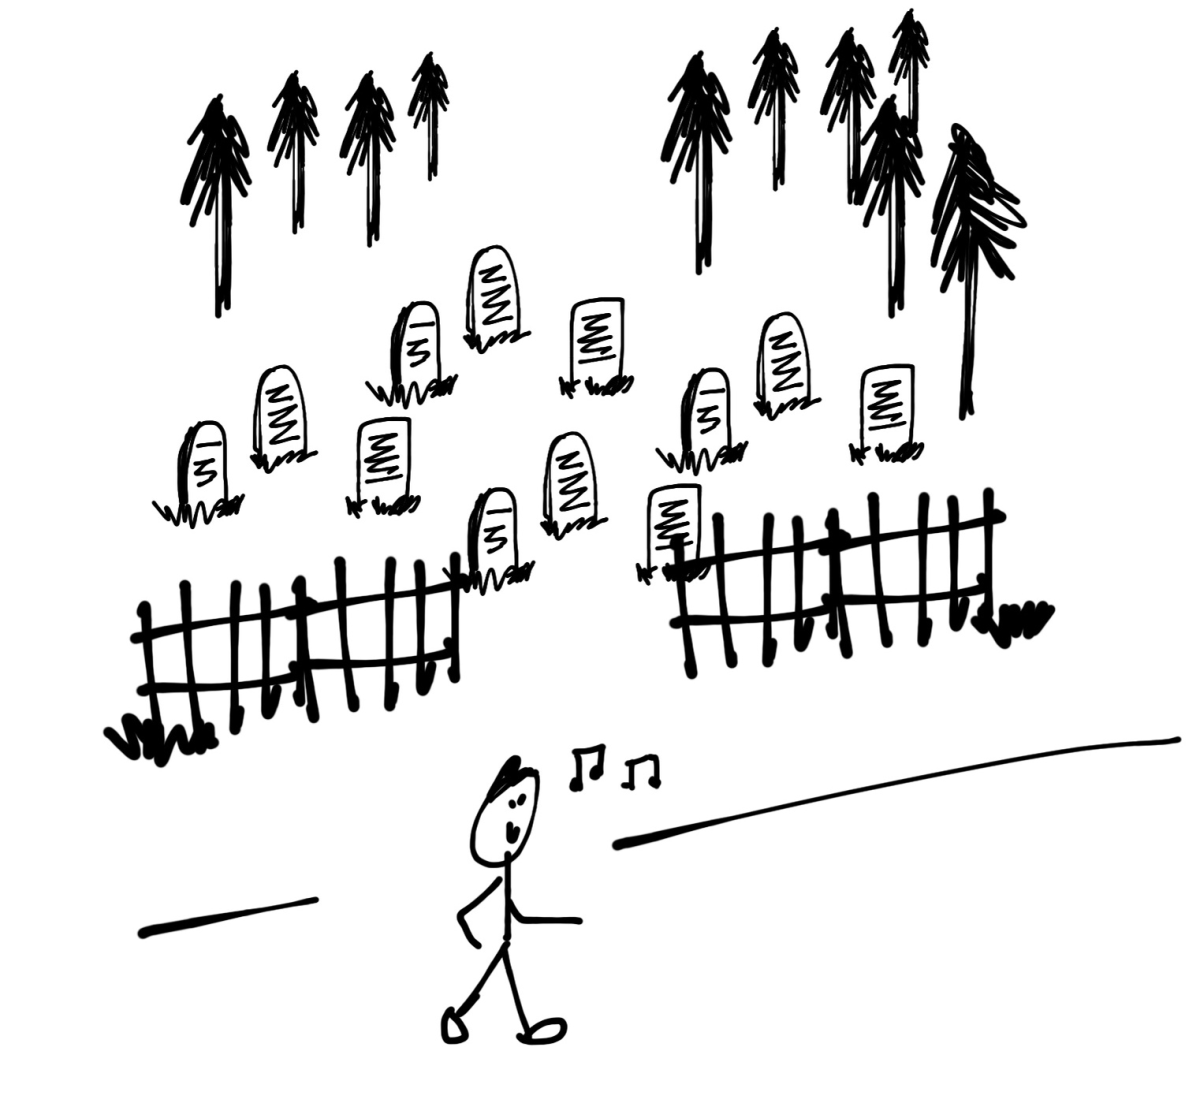 Whistling Past the Graveyard:  "To enter a situation with little or no understanding of the possible consequences."